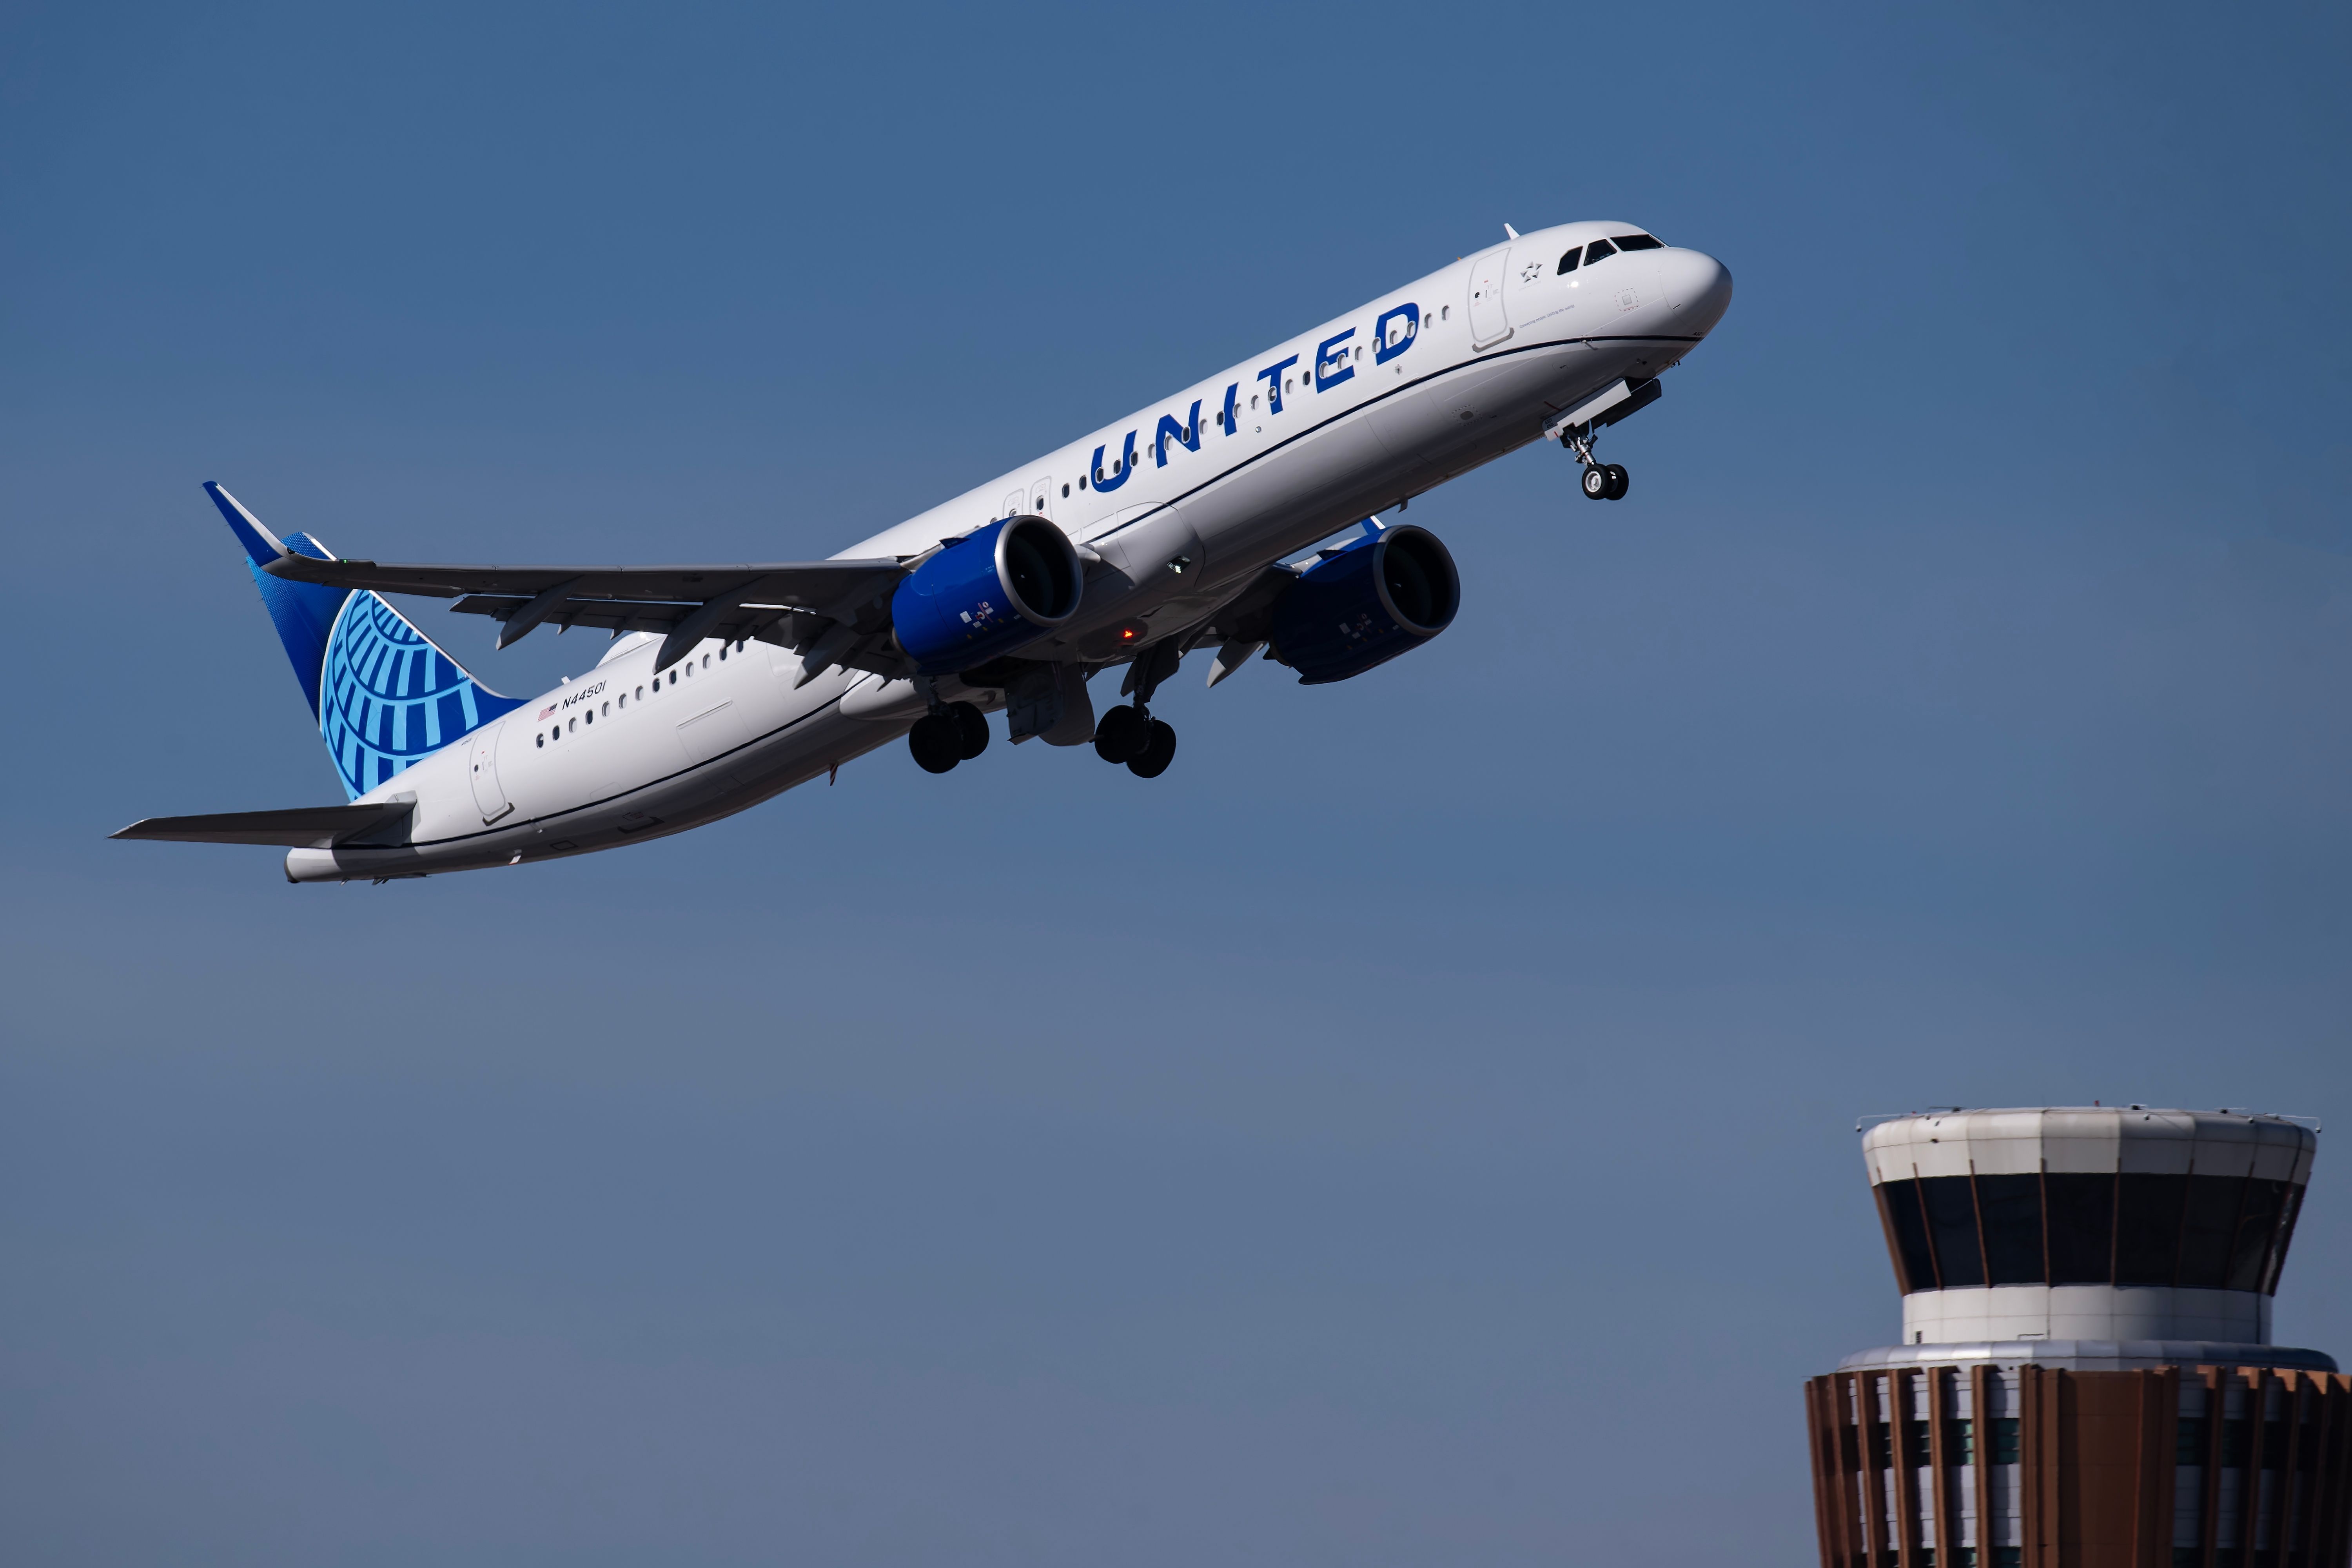 United Airlines Airbus A321neo departing from Phoenix Sky Harbor International Airport.